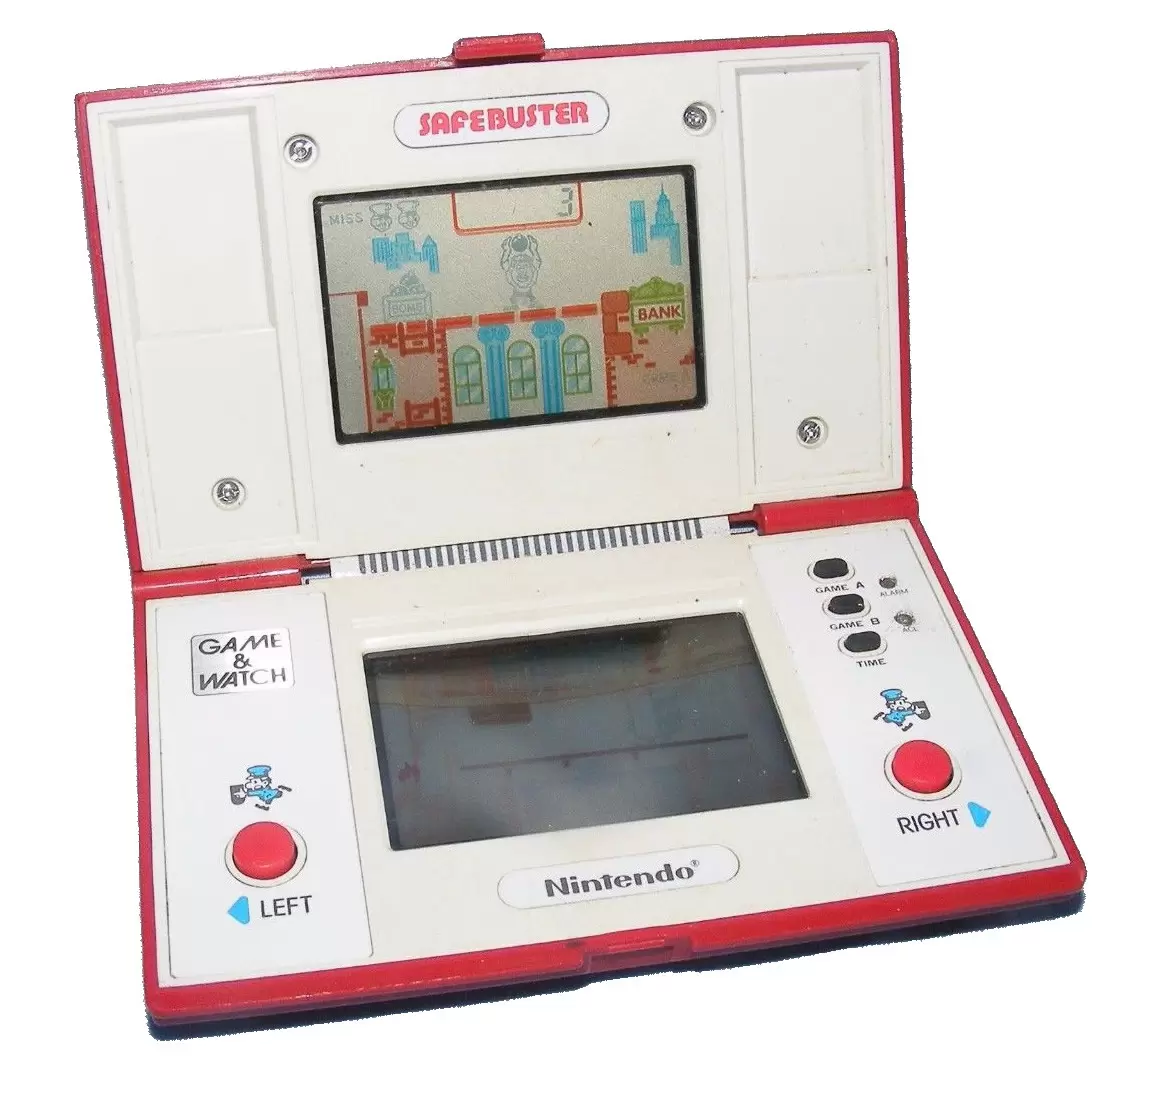 Game & Watch - Safe buster